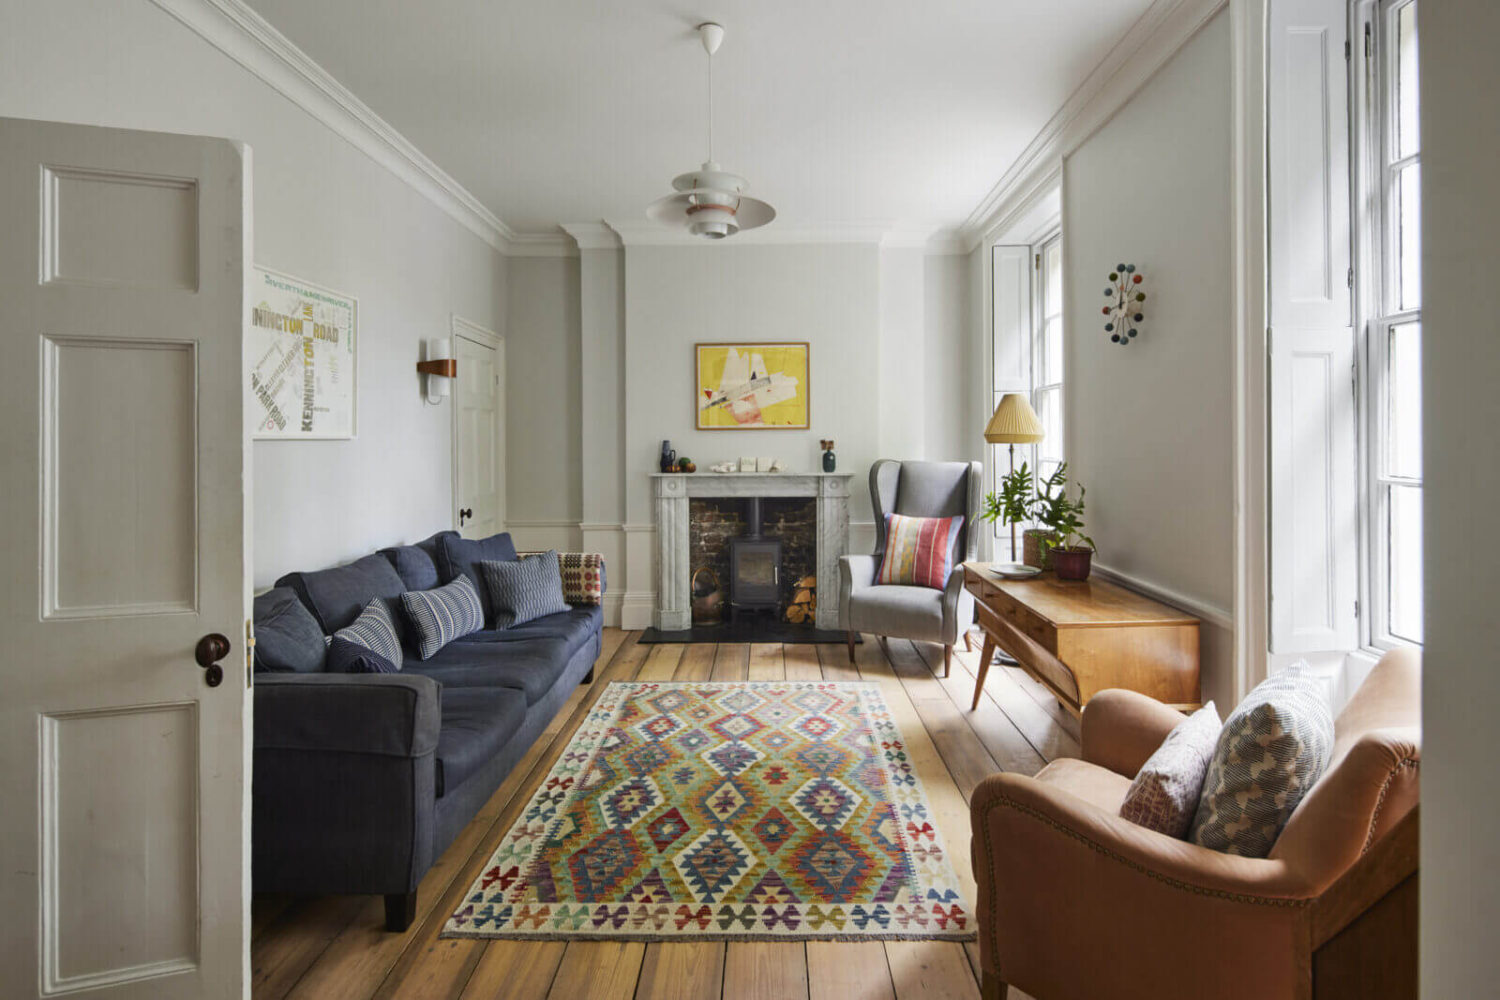 sitting-room-firplace-wooden-floor-london-home-nordroom